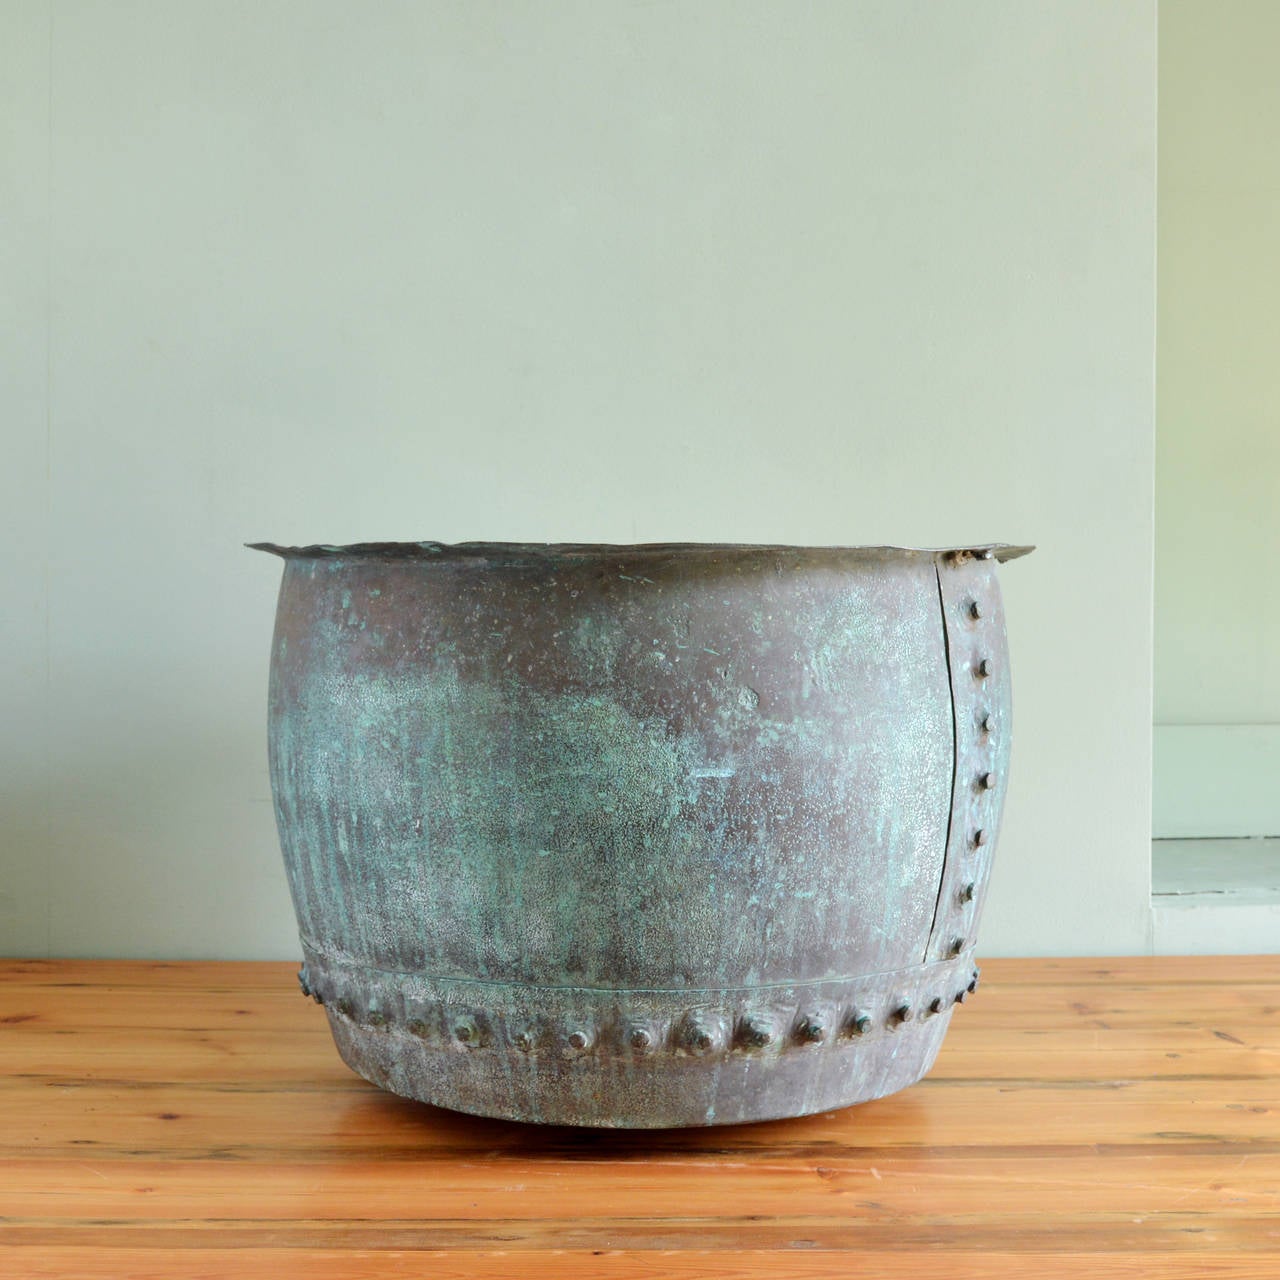 A nineteenth century riveted copper vat with well weathered verdigris exterior.

Available to view at Brunswick House, London.

52cm high, 32cm diameter.